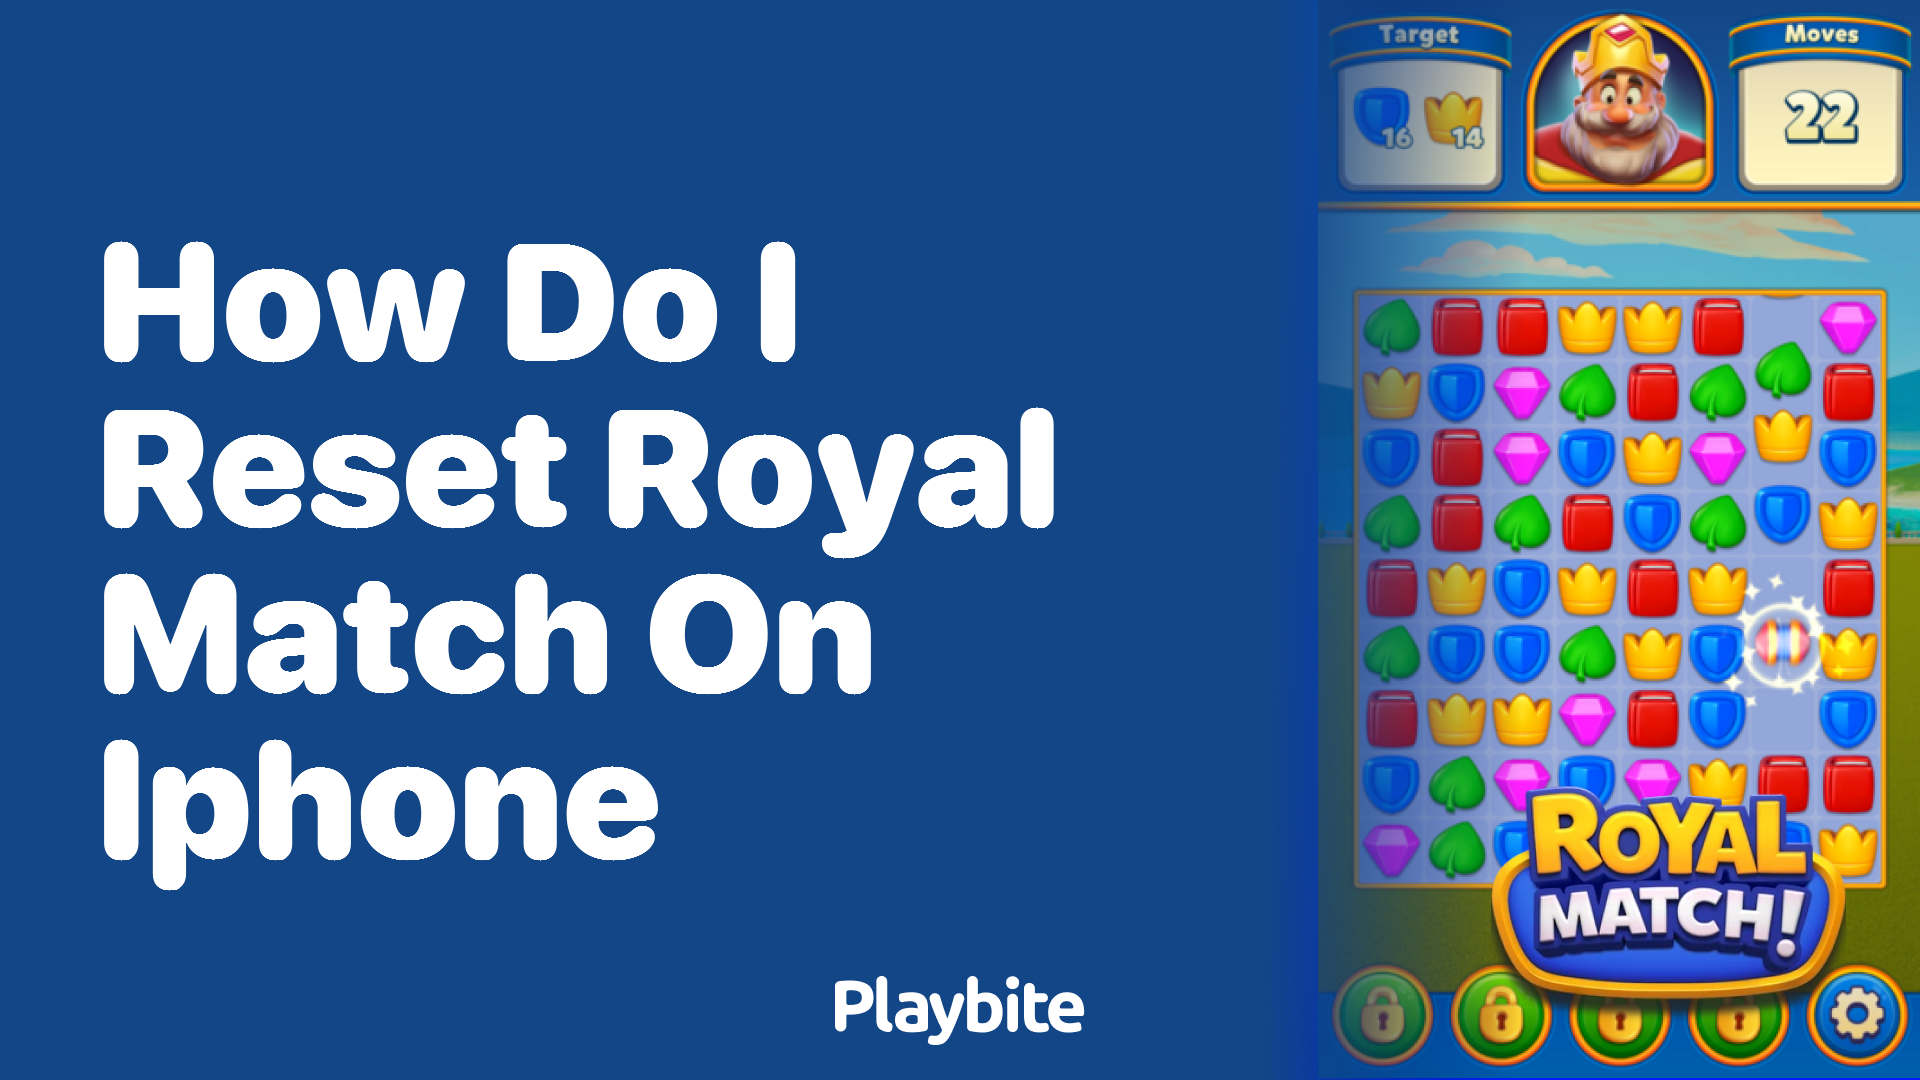 How Do I Reset Royal Match on iPhone?